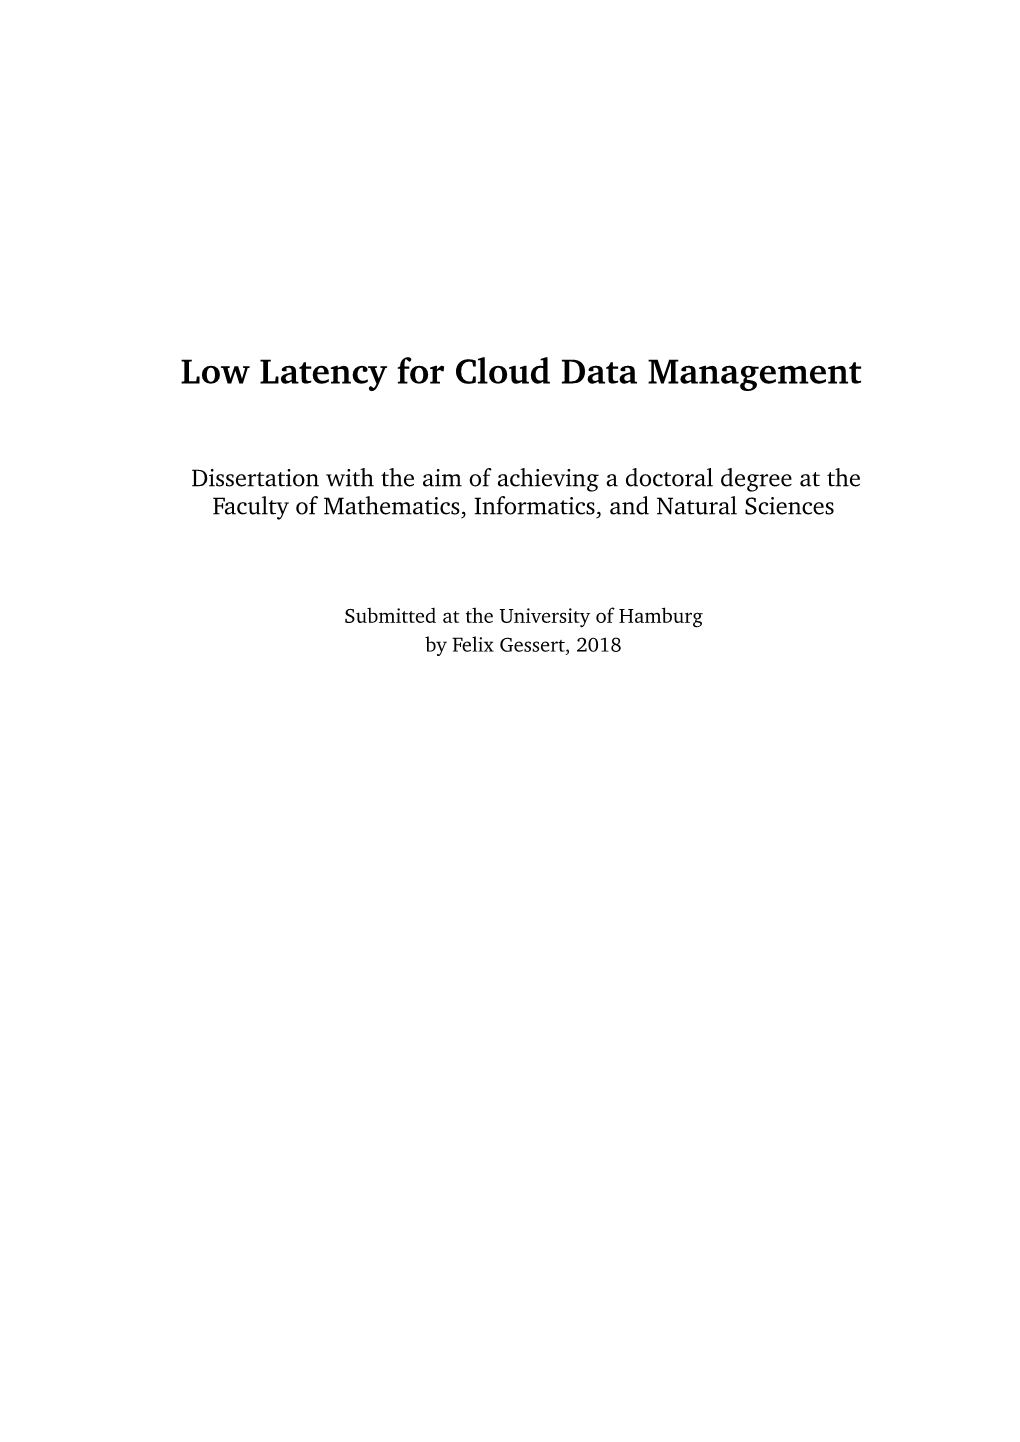 Low Latency for Cloud Data Management